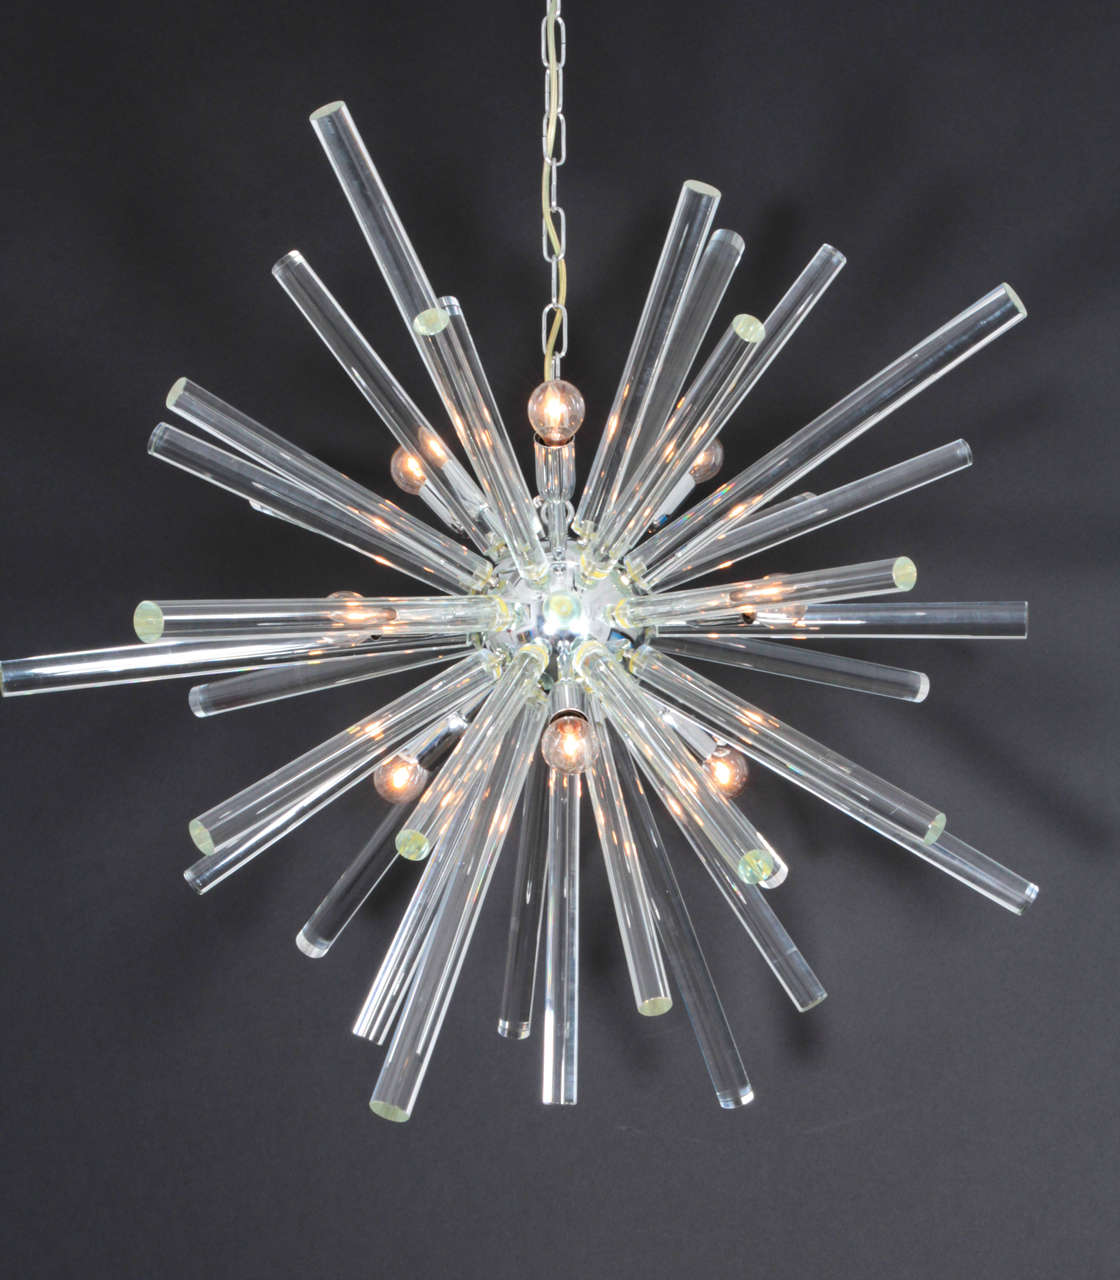 Bakalowits & Söhne (founded 1845 in Vienna)

“Starburst” chandelier  c.1970’s

Crystal rods of varying lengths with nine lights, 
chromium-plated metal ceiling cap and spherical chandelier parts.

Ceiling to drop length: 46 1/2